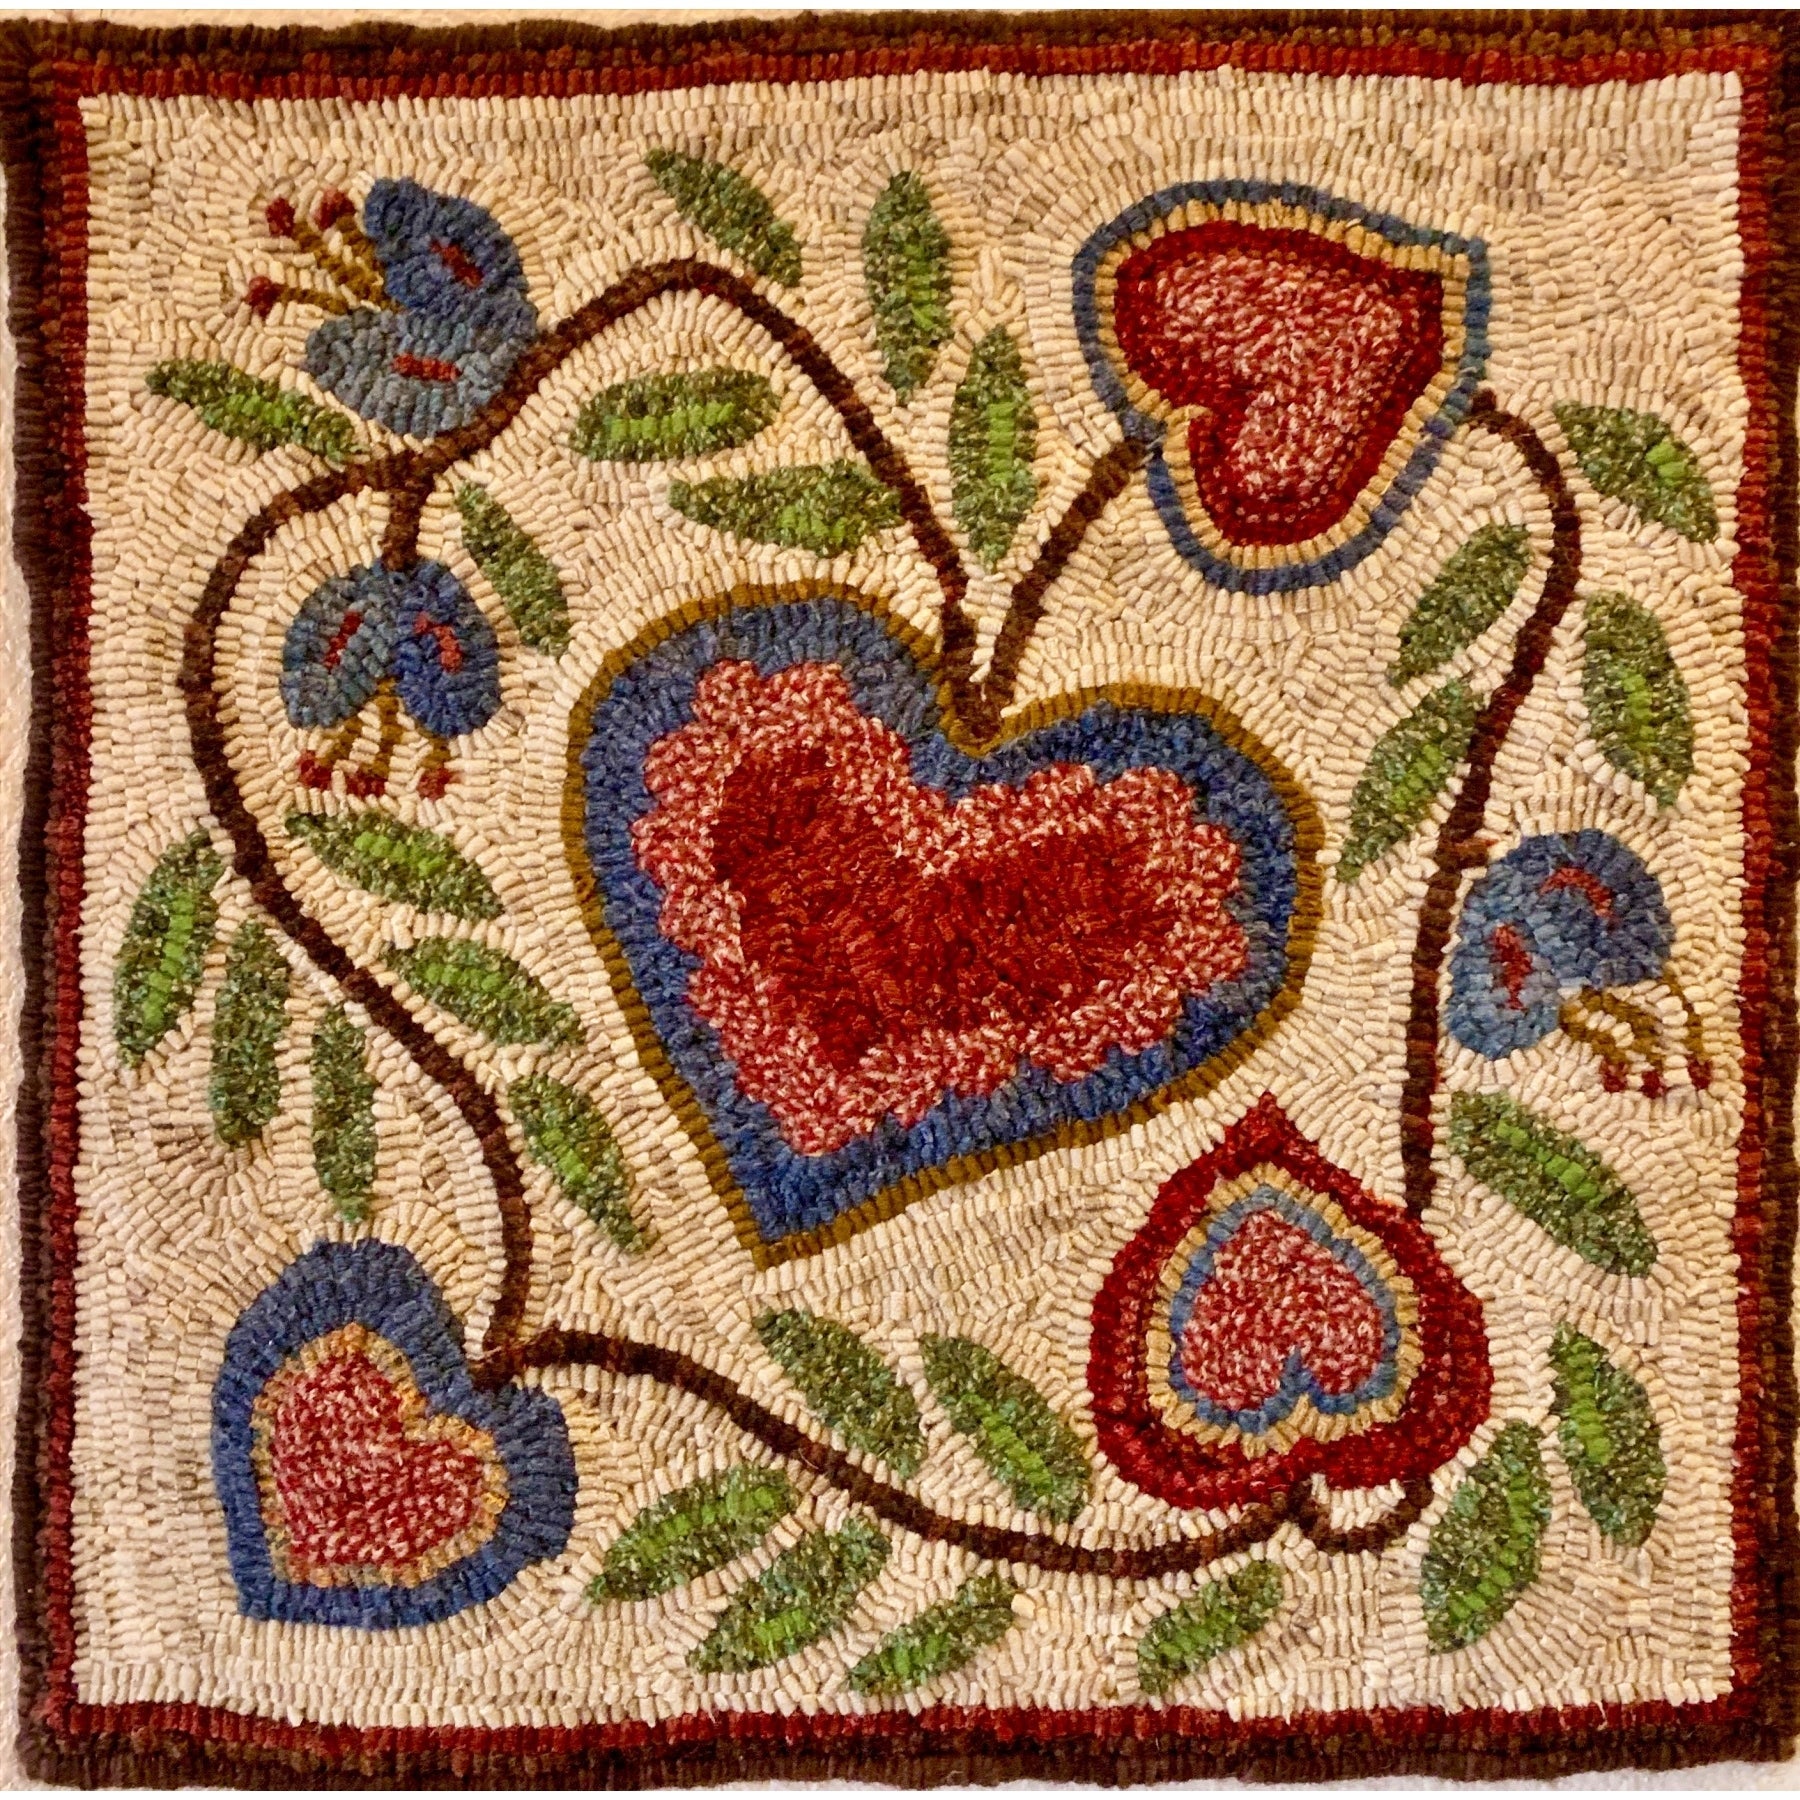 Hearts And Tulips, rug hooked by Margaret Bedle